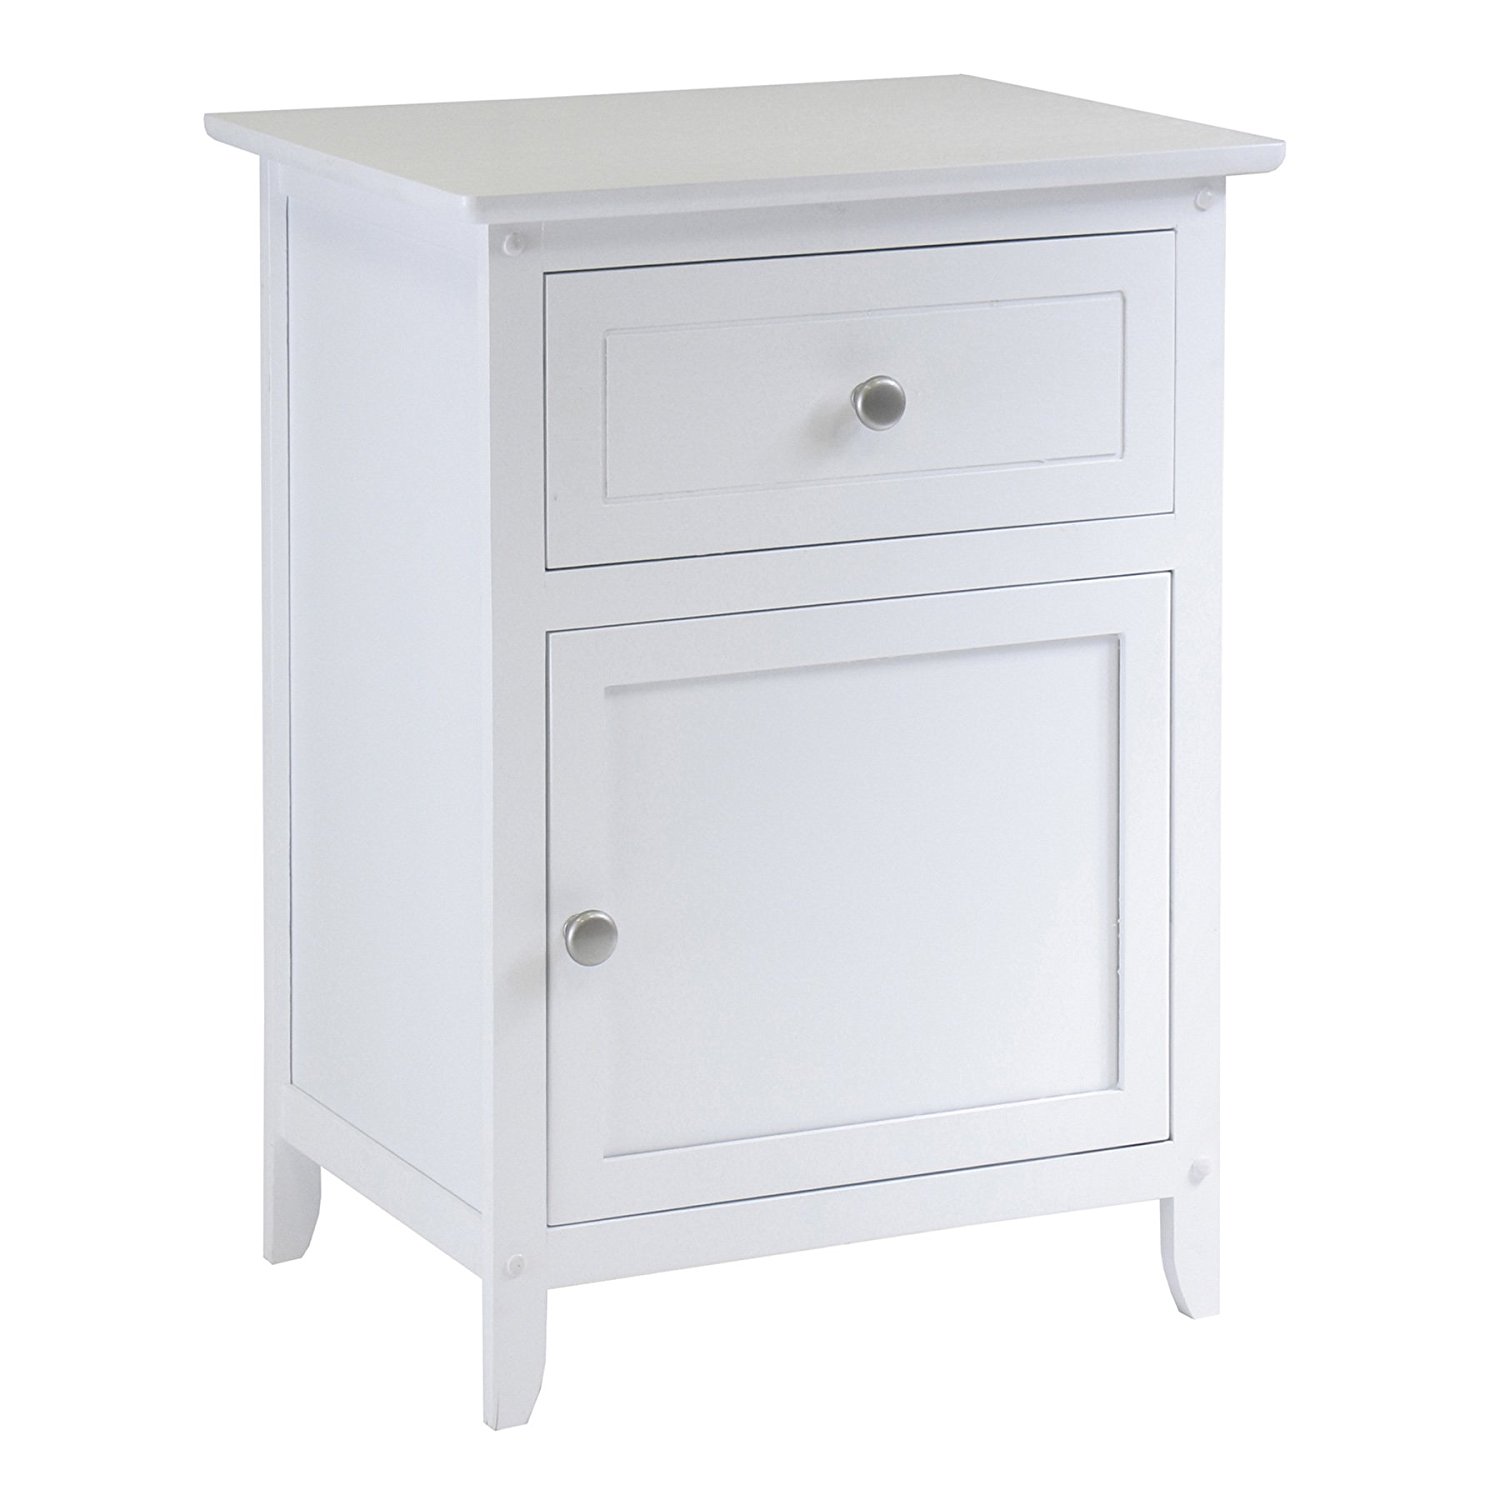 silver accent table probably fantastic amazing white end sturdy bedroom tables top terrific dark wood bedside nightstand with home interior superior excellent small for side from